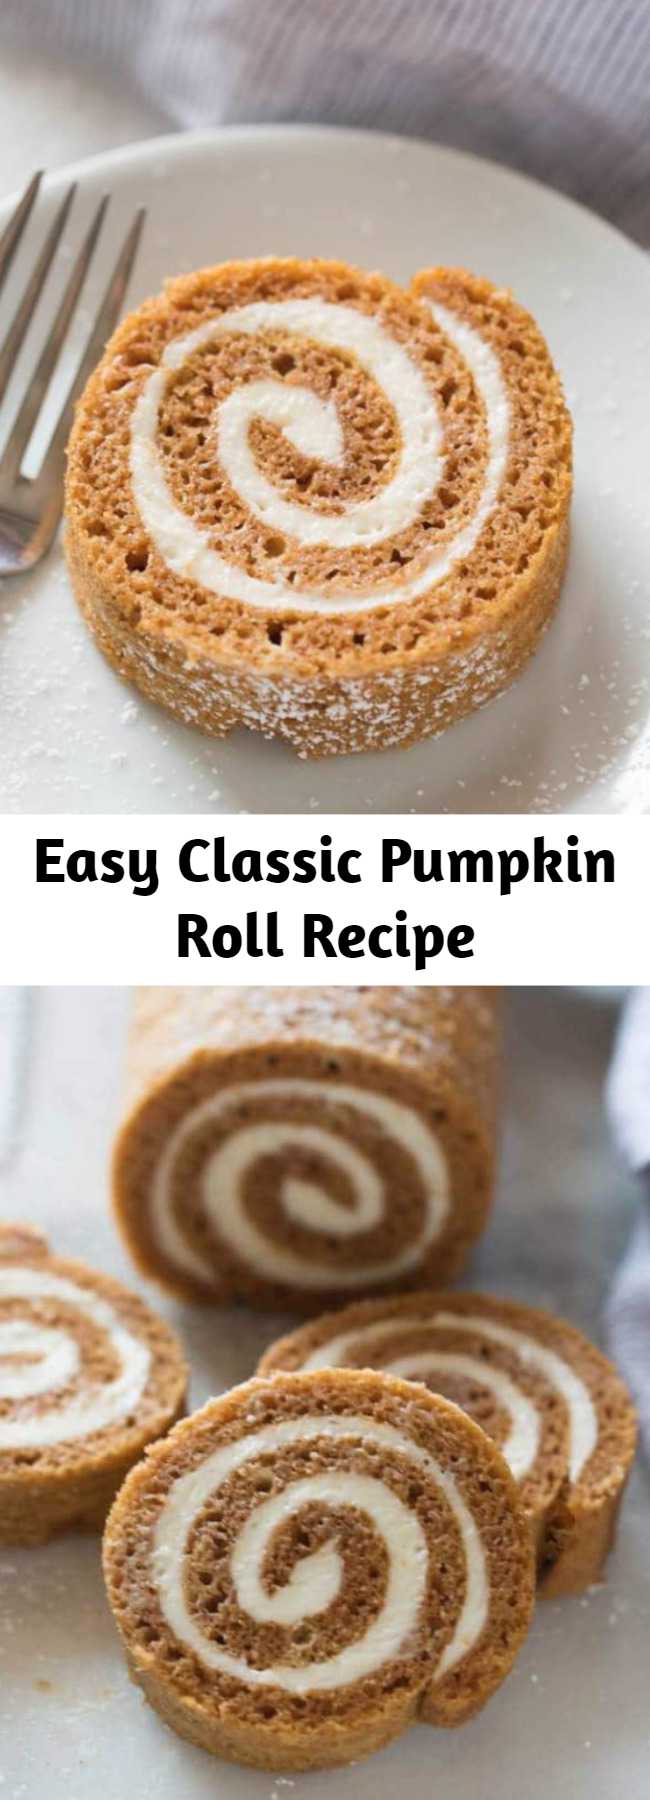 Easy Classic Pumpkin Roll Recipe - I’ve got one simple trick that makes this classic Pumpkin Roll recipe EASY and mess-free! This classic pumpkin roll recipe is made with a delicious pumpkin cake, rolled up with a fluffy cream cheese filling. It has the best soft texture and flavor with a delicious cream cheese filling.  Always a crowd favorite, and easier than ever to make!